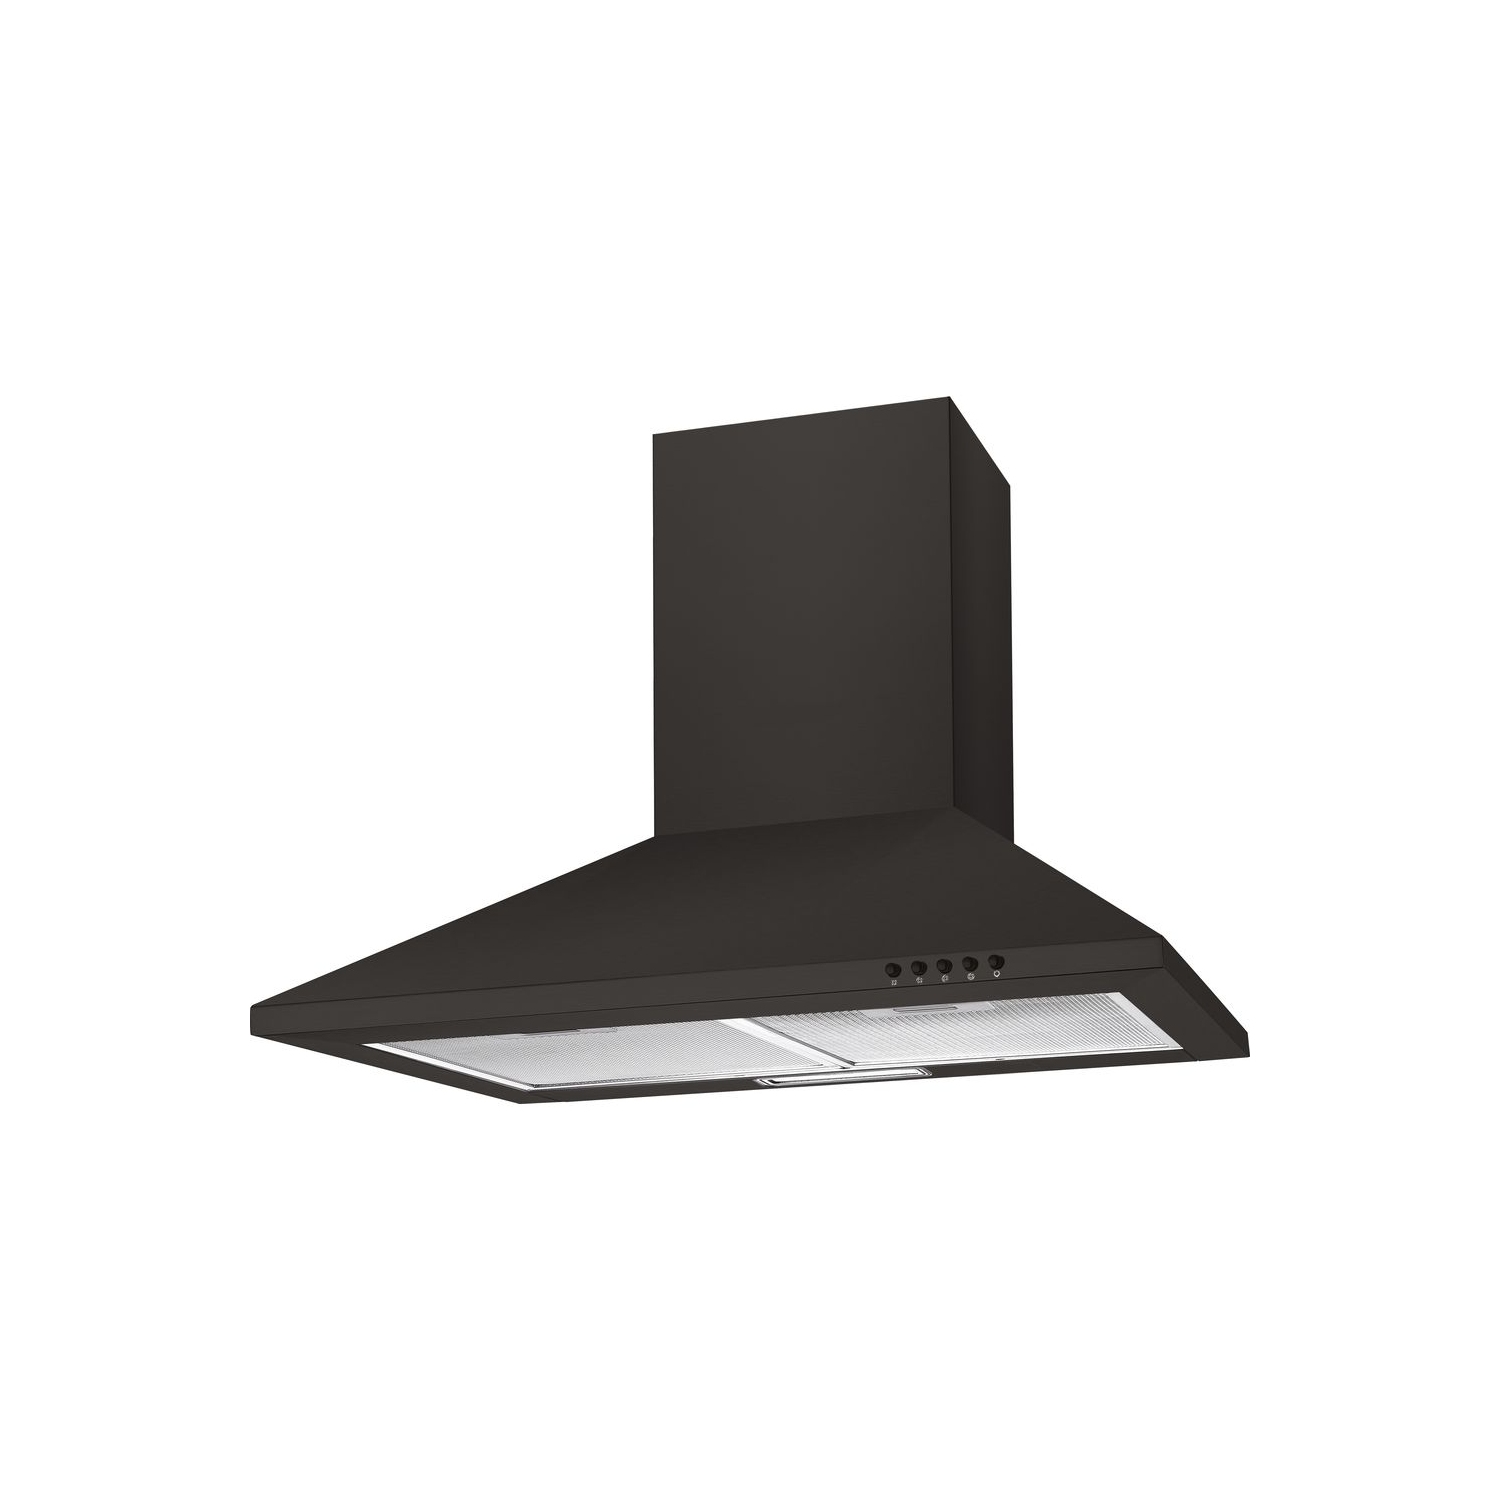 Candy 60cm Chimney Cooker - Black - C Rated - 0